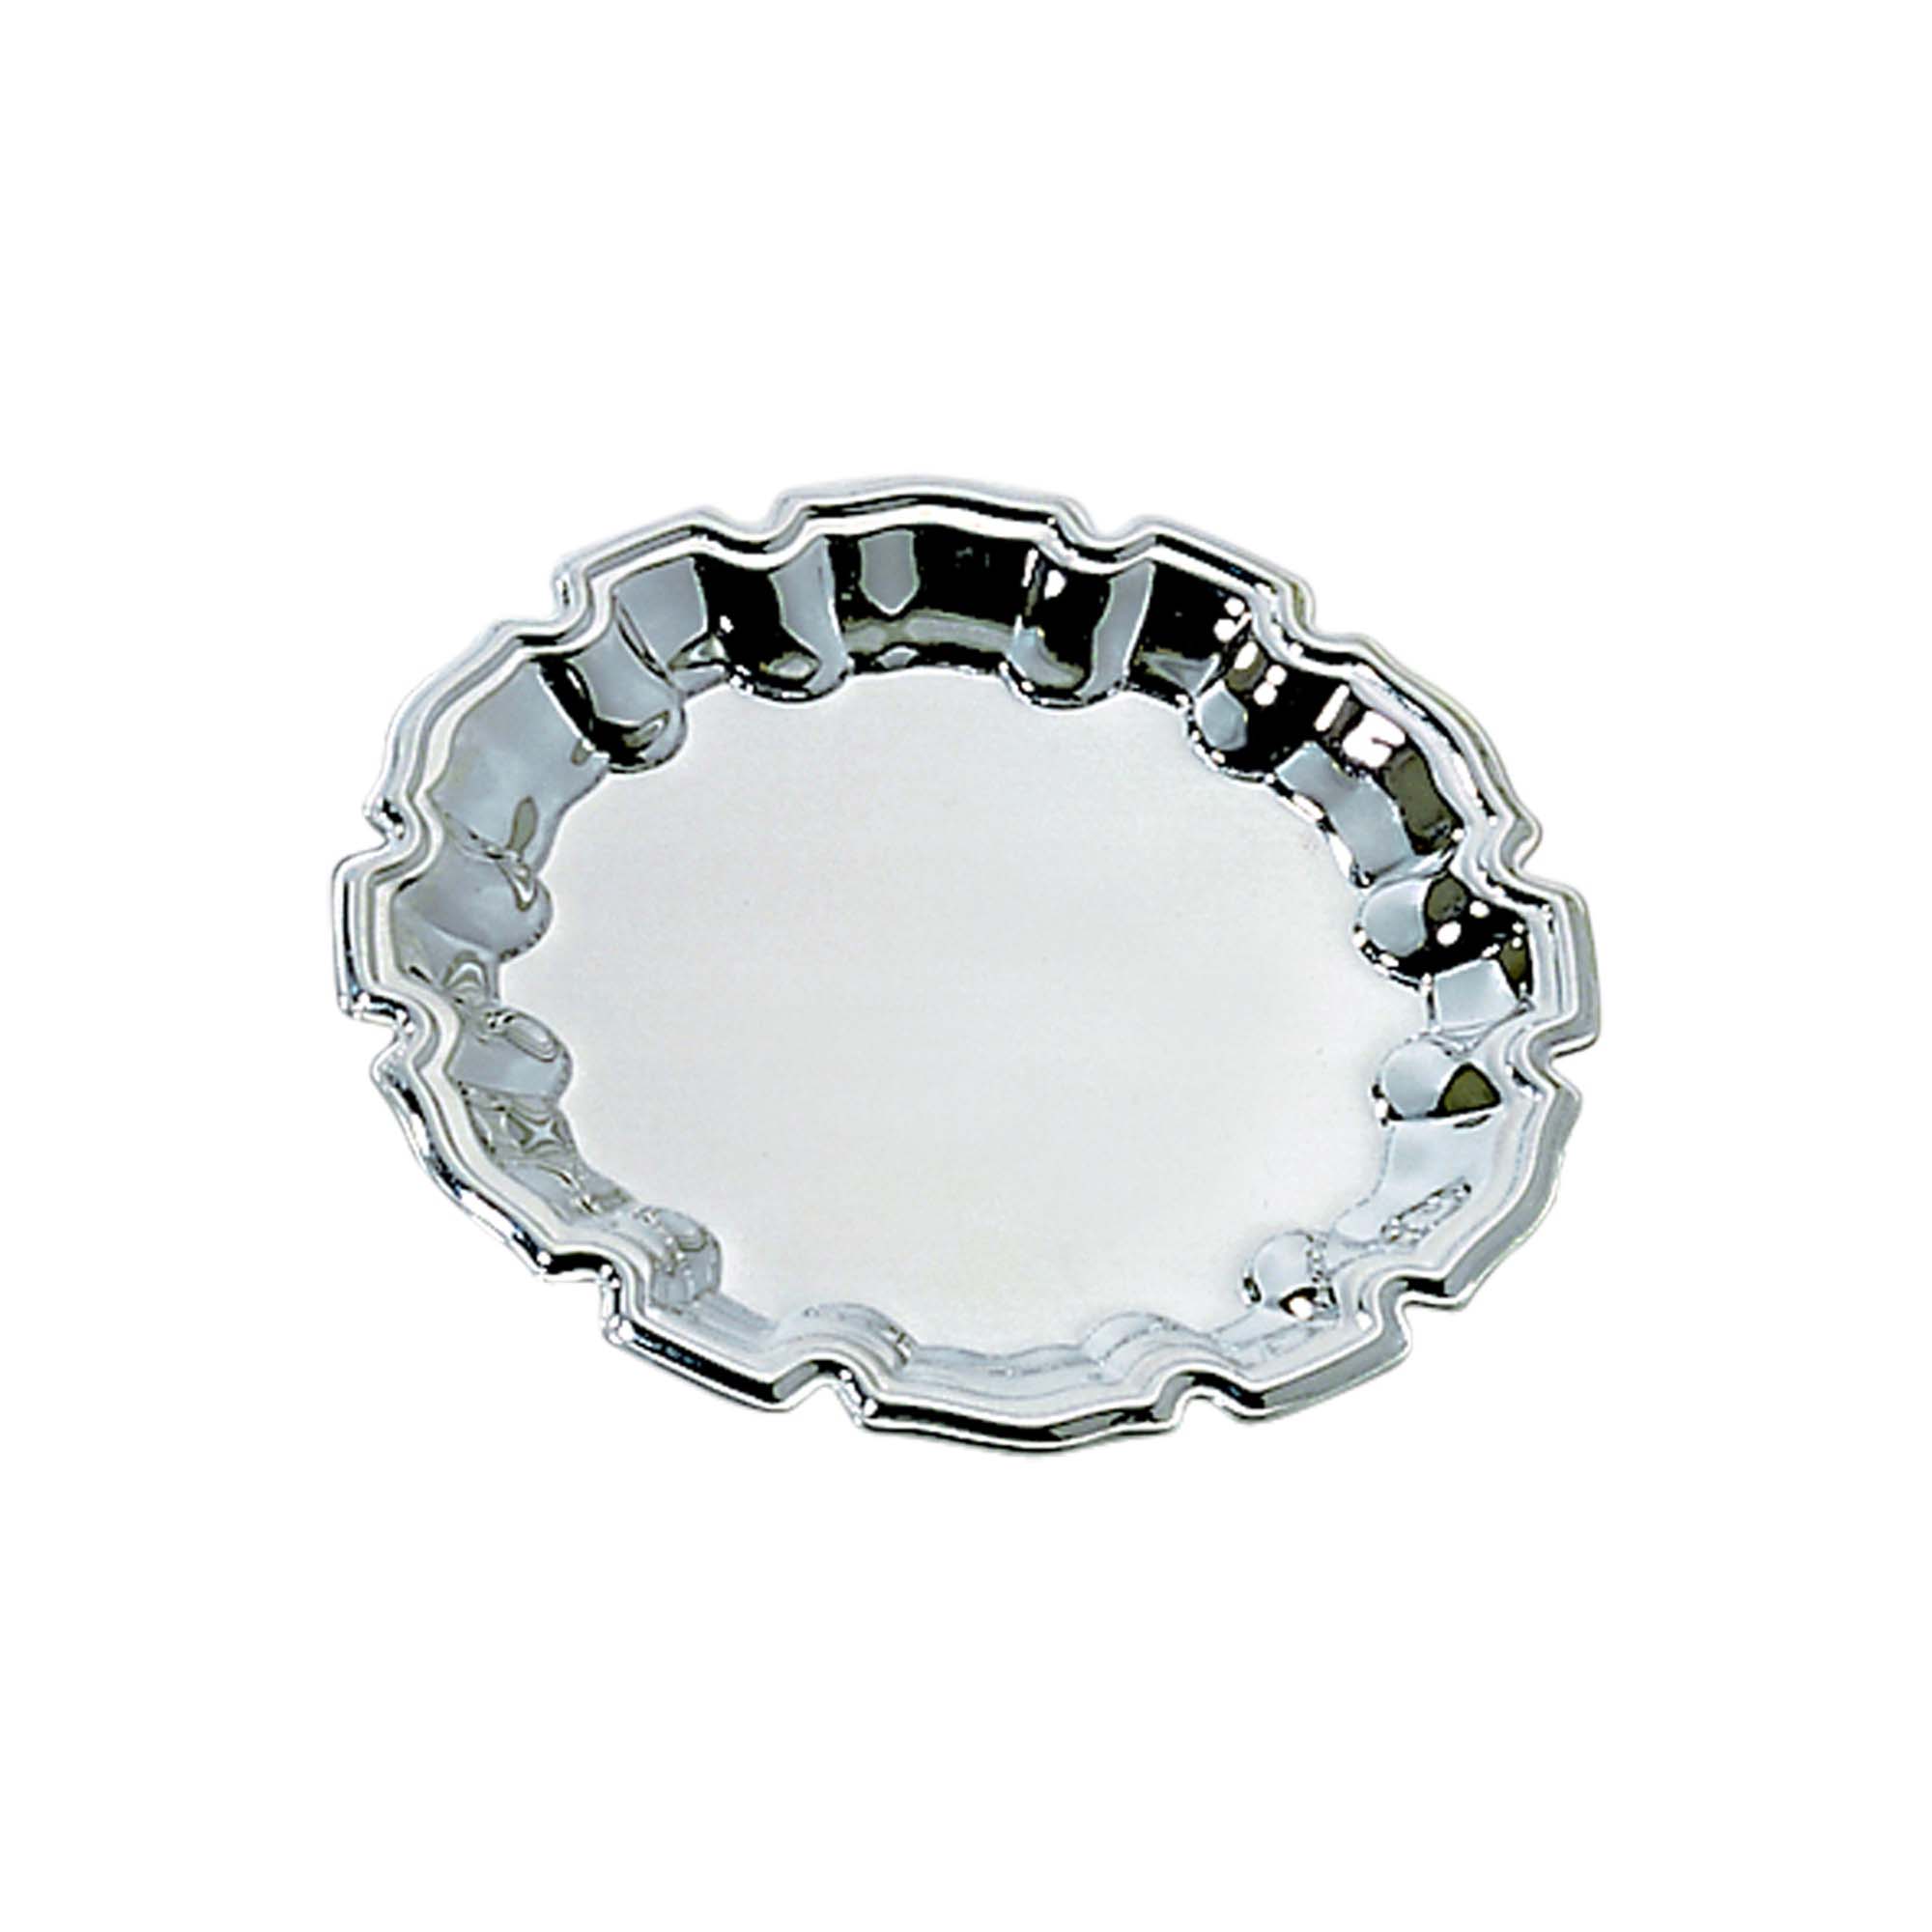 Contemporary Home Living 12" Silver Round Stainless Steel Tray